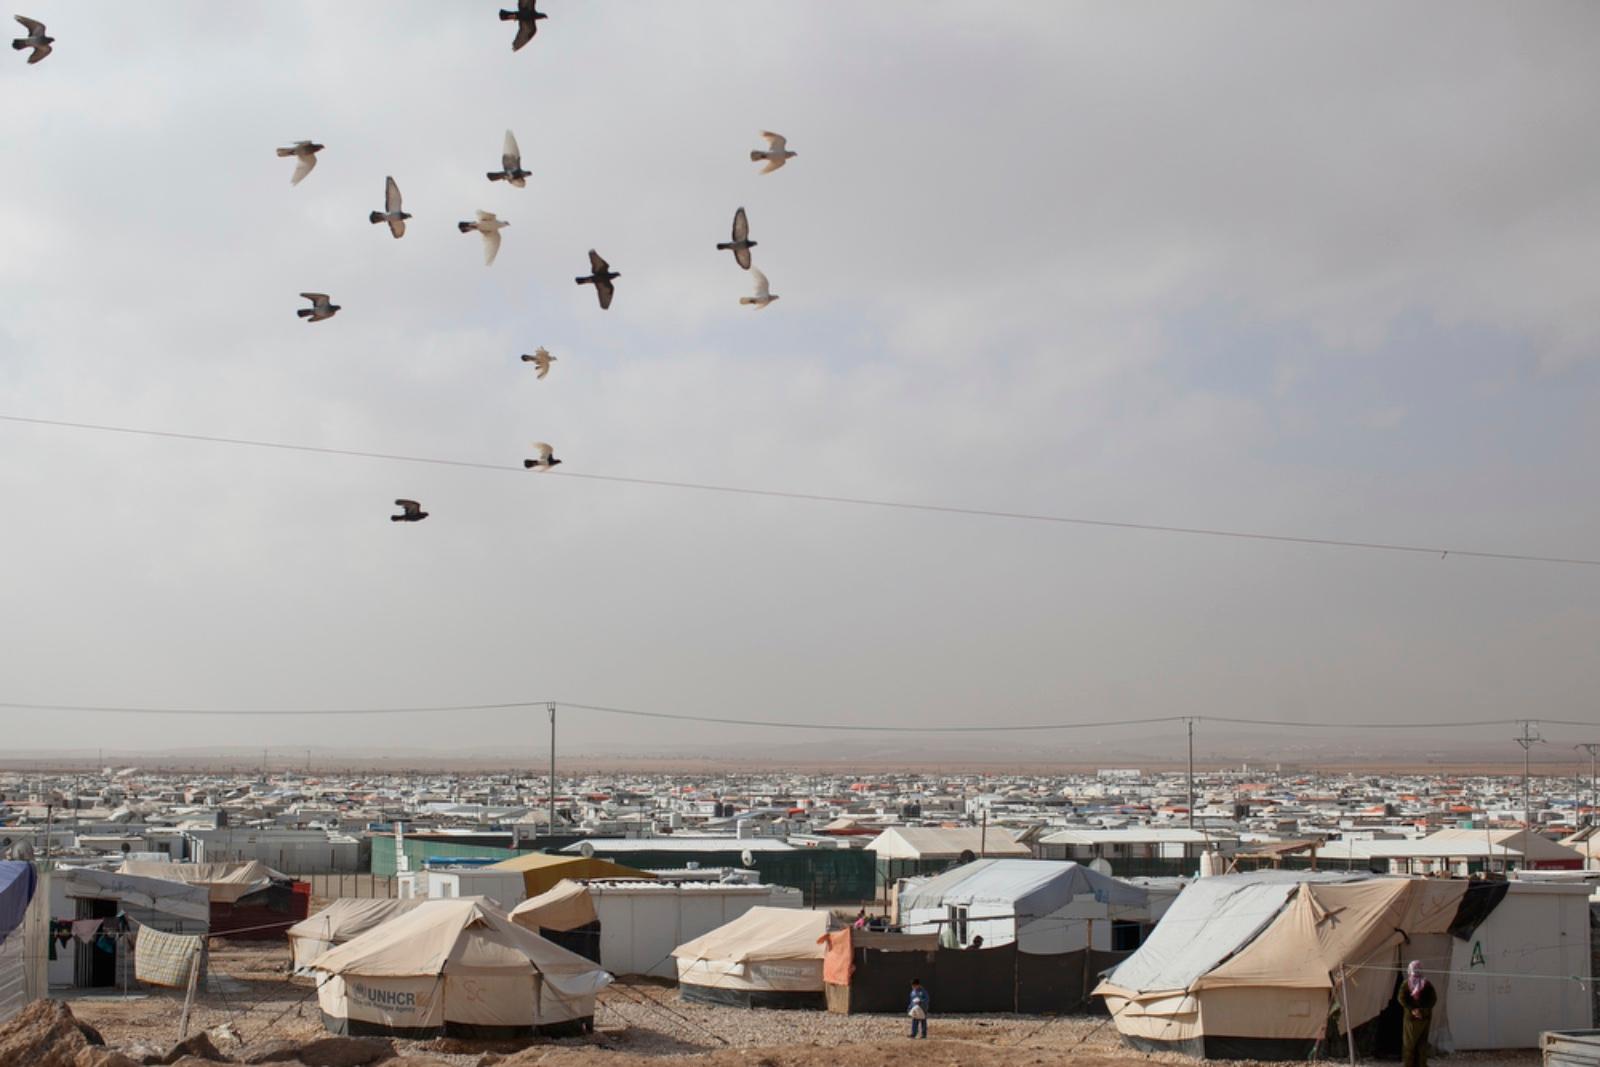 A view of Zaatari refugee camp. First opened on July 23, 2012 as a temporary settlement in Jordan for Syrians fleeing conflict has since turned into a permanent fixture resembling a small city rather than a temporary refugee camp. There is an estimated ov